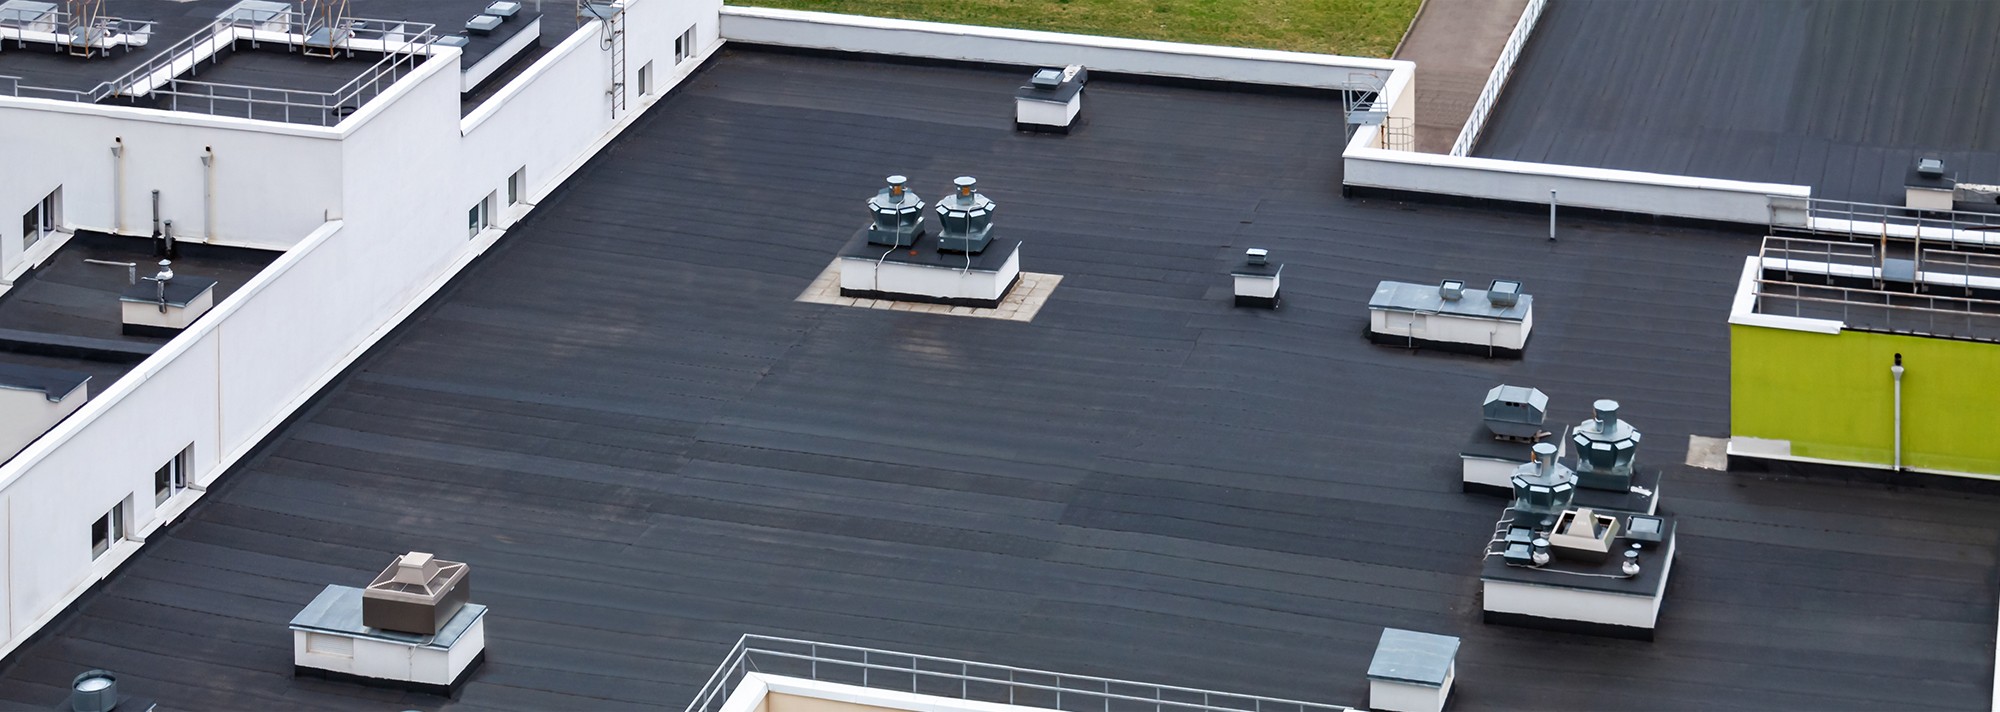 Flat roofing system on commercial building in Indianapolis